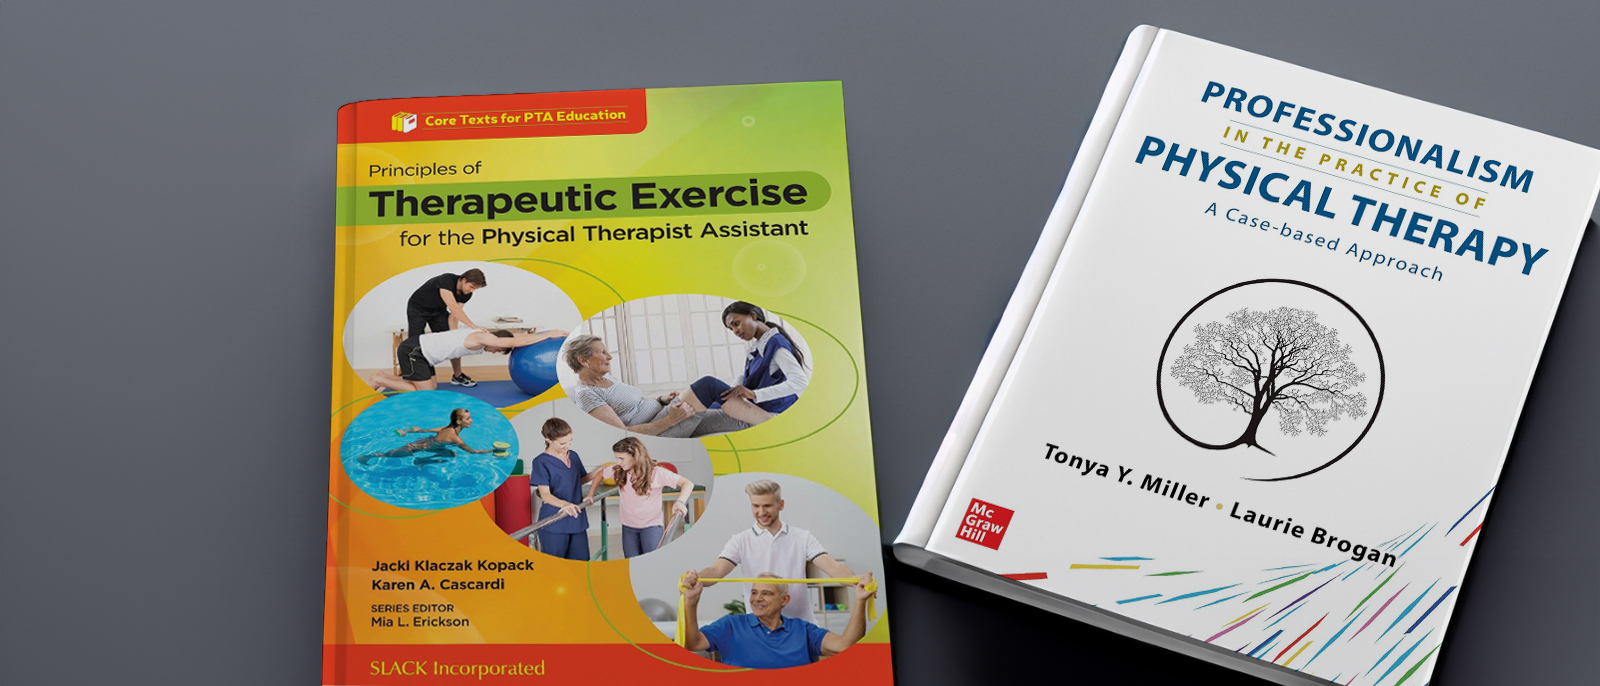 HU Professors Publish Original Textbooks for Physical Therapy Students and Clinicians